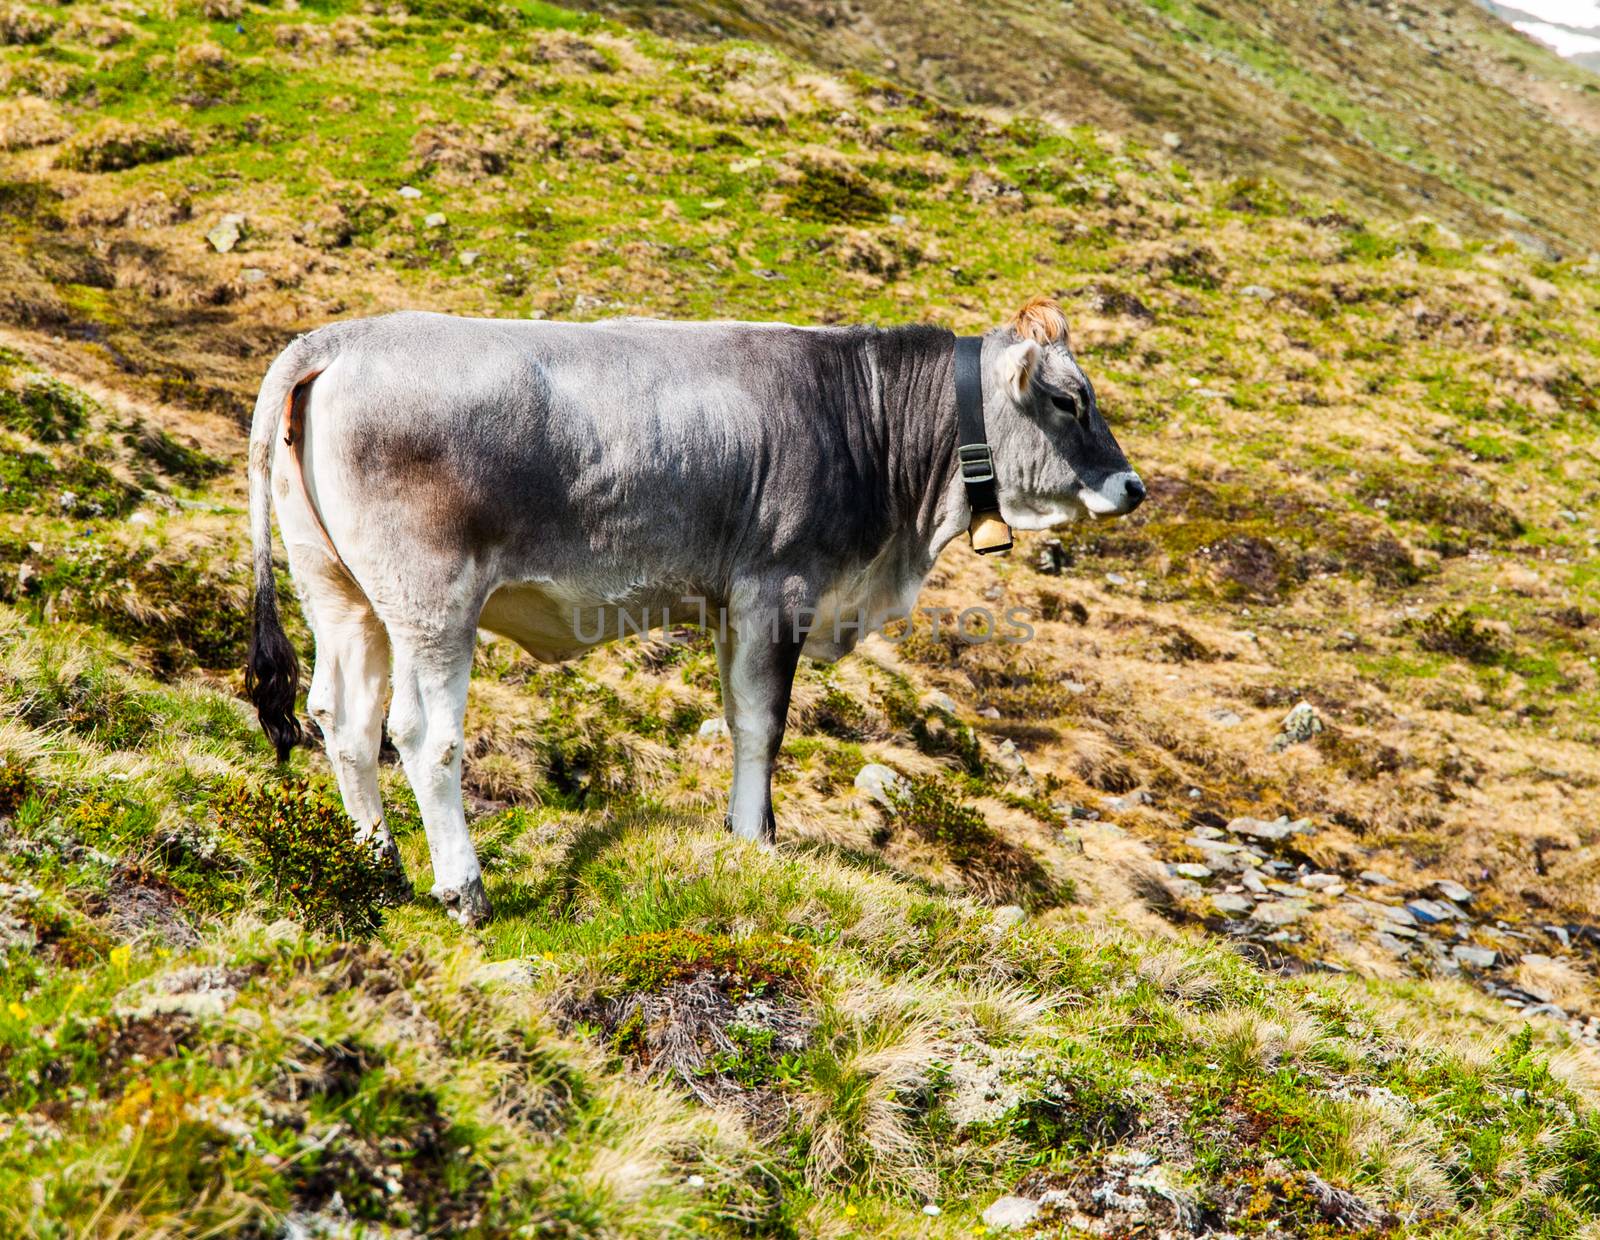 Cute grey alpine cow with bell on the neck grazing on the meadow by pyty